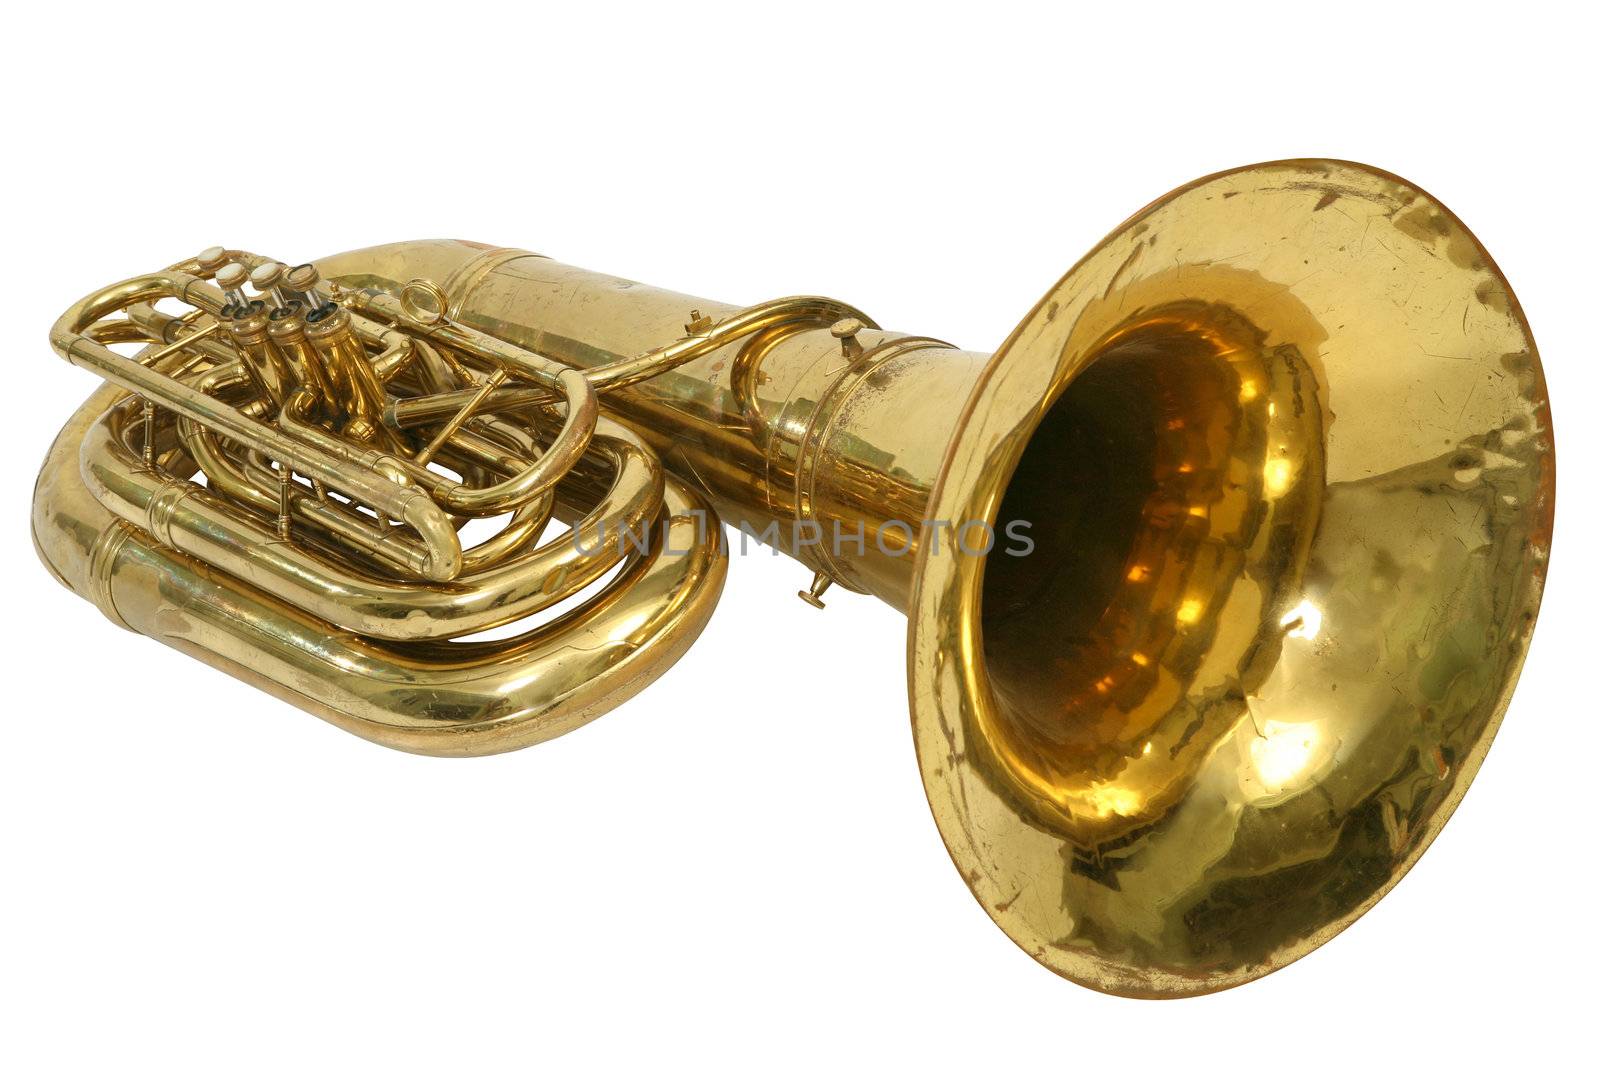 Wind musical instrument tuba on a white background by skutin